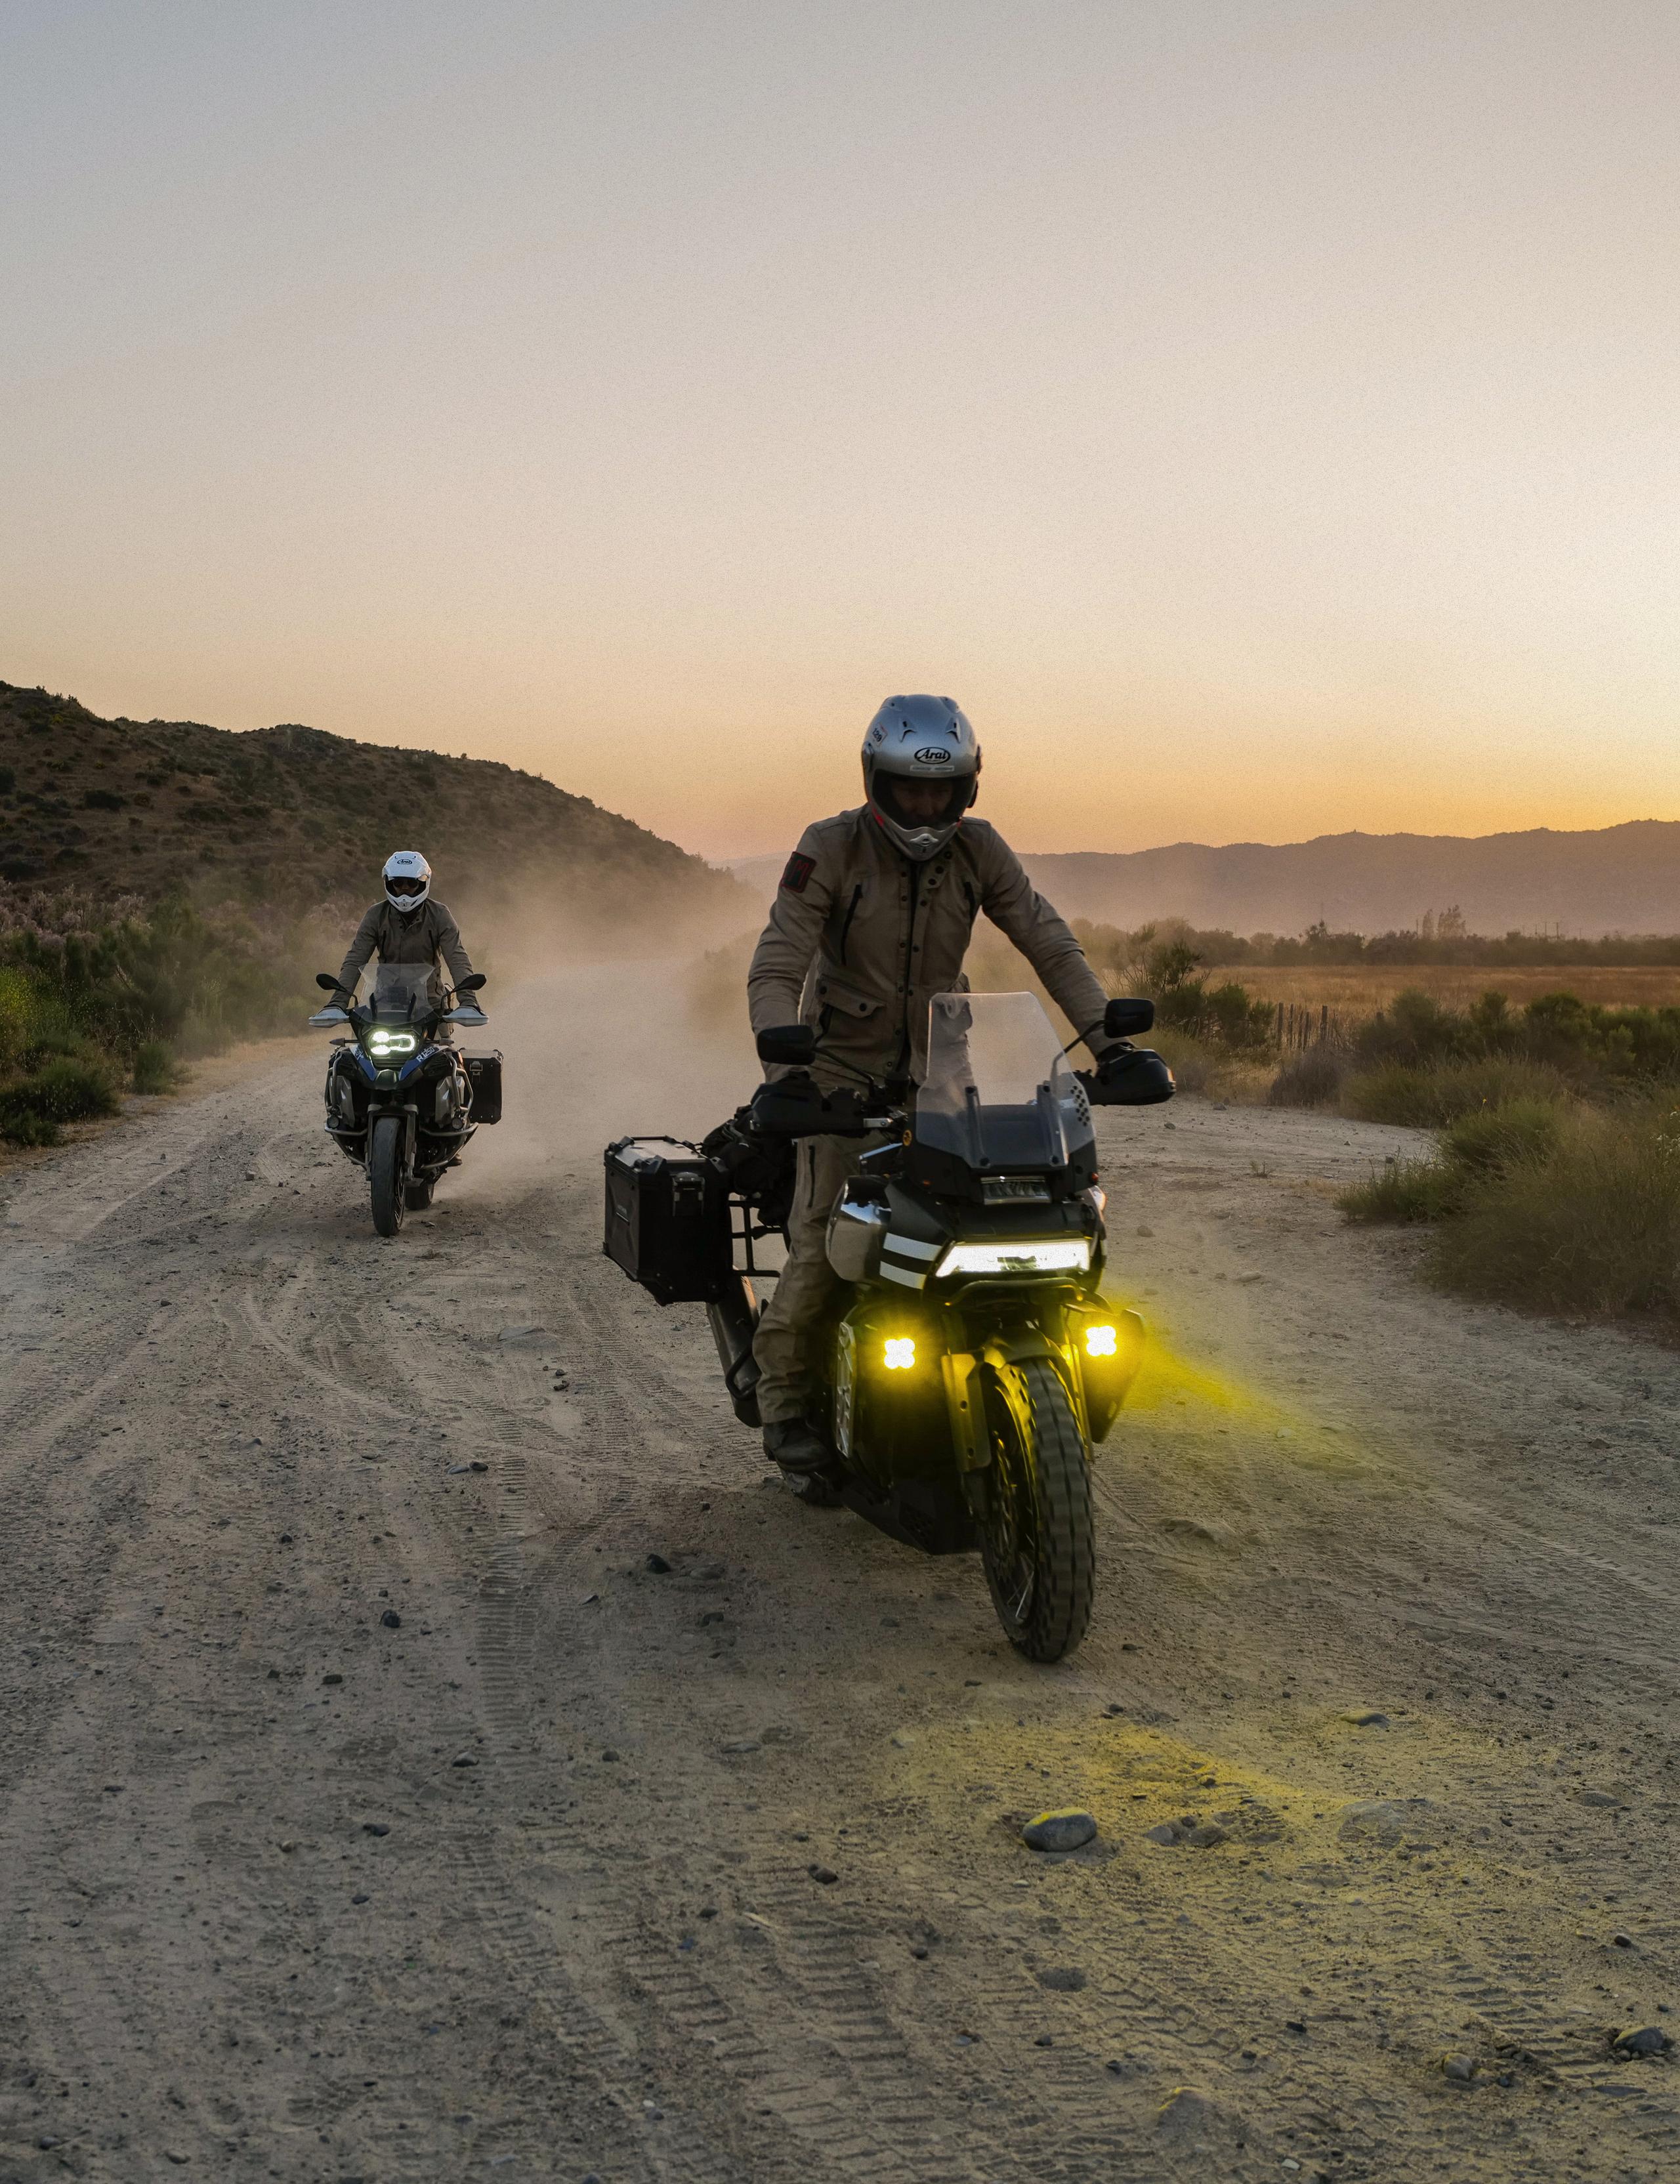 Two motorcyclists riding on dirt path in Baja California at dusk